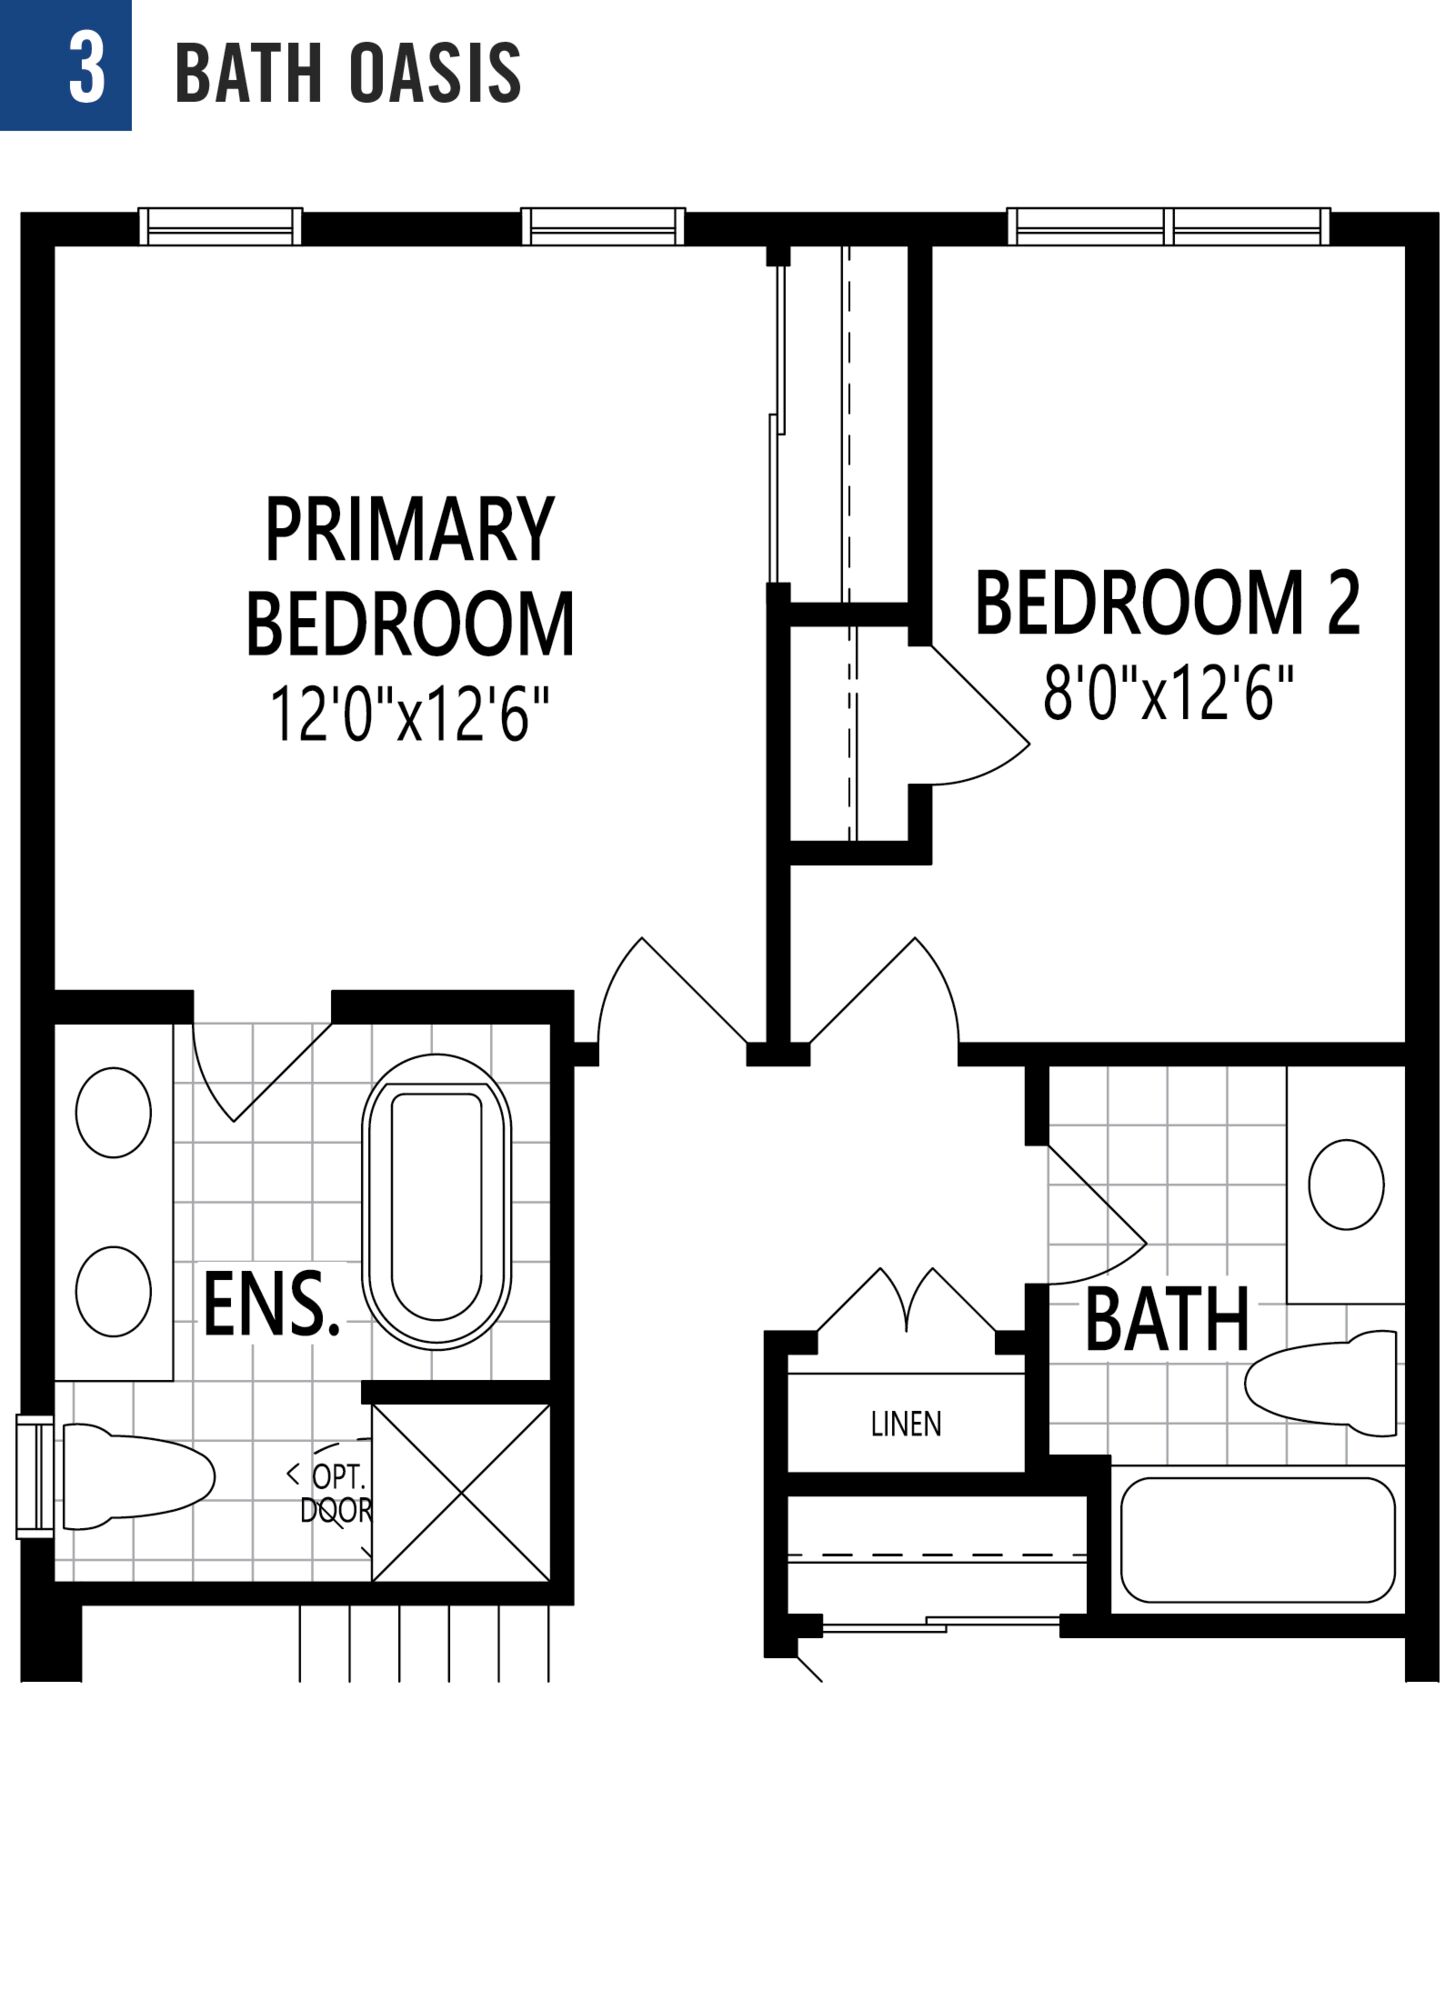 Atrium Floor Plan of Half Moon Bay Towns with undefined beds